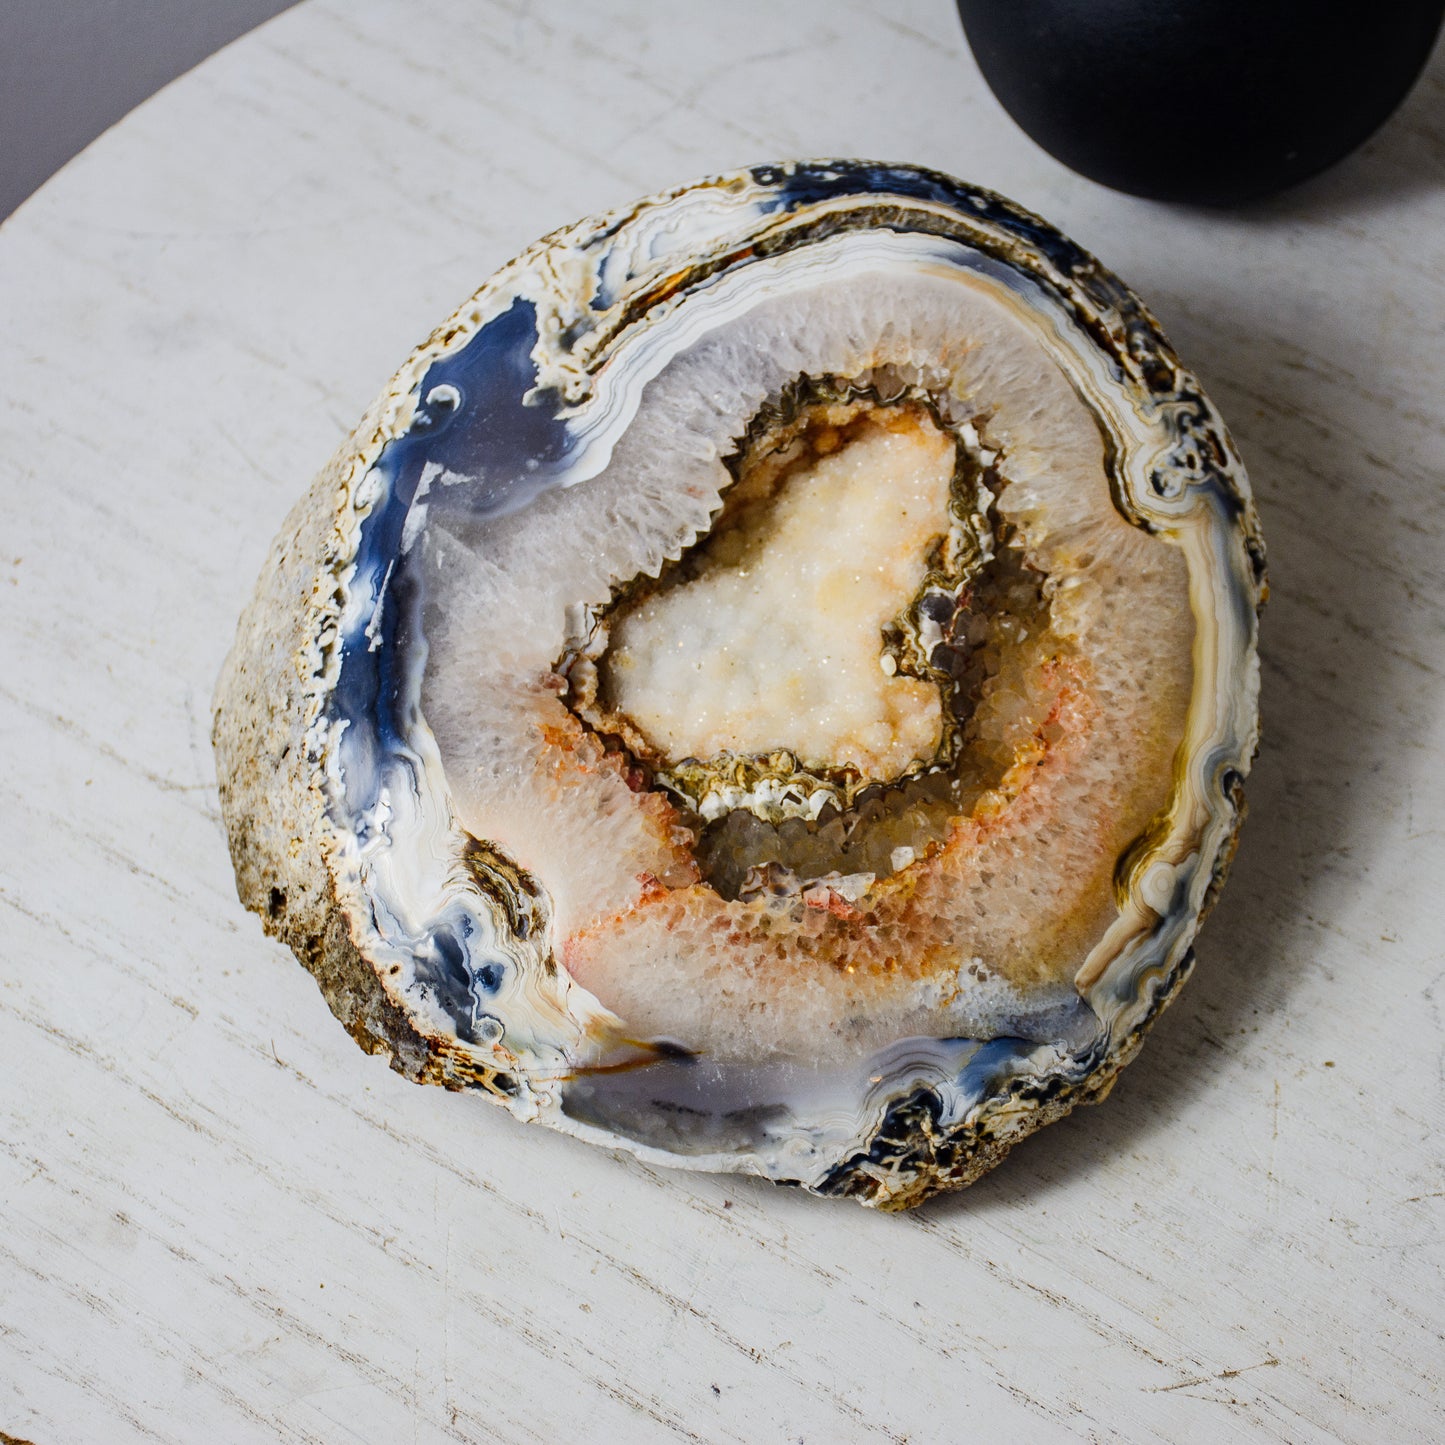 Agate Heart Geode | Surry Hills Stones